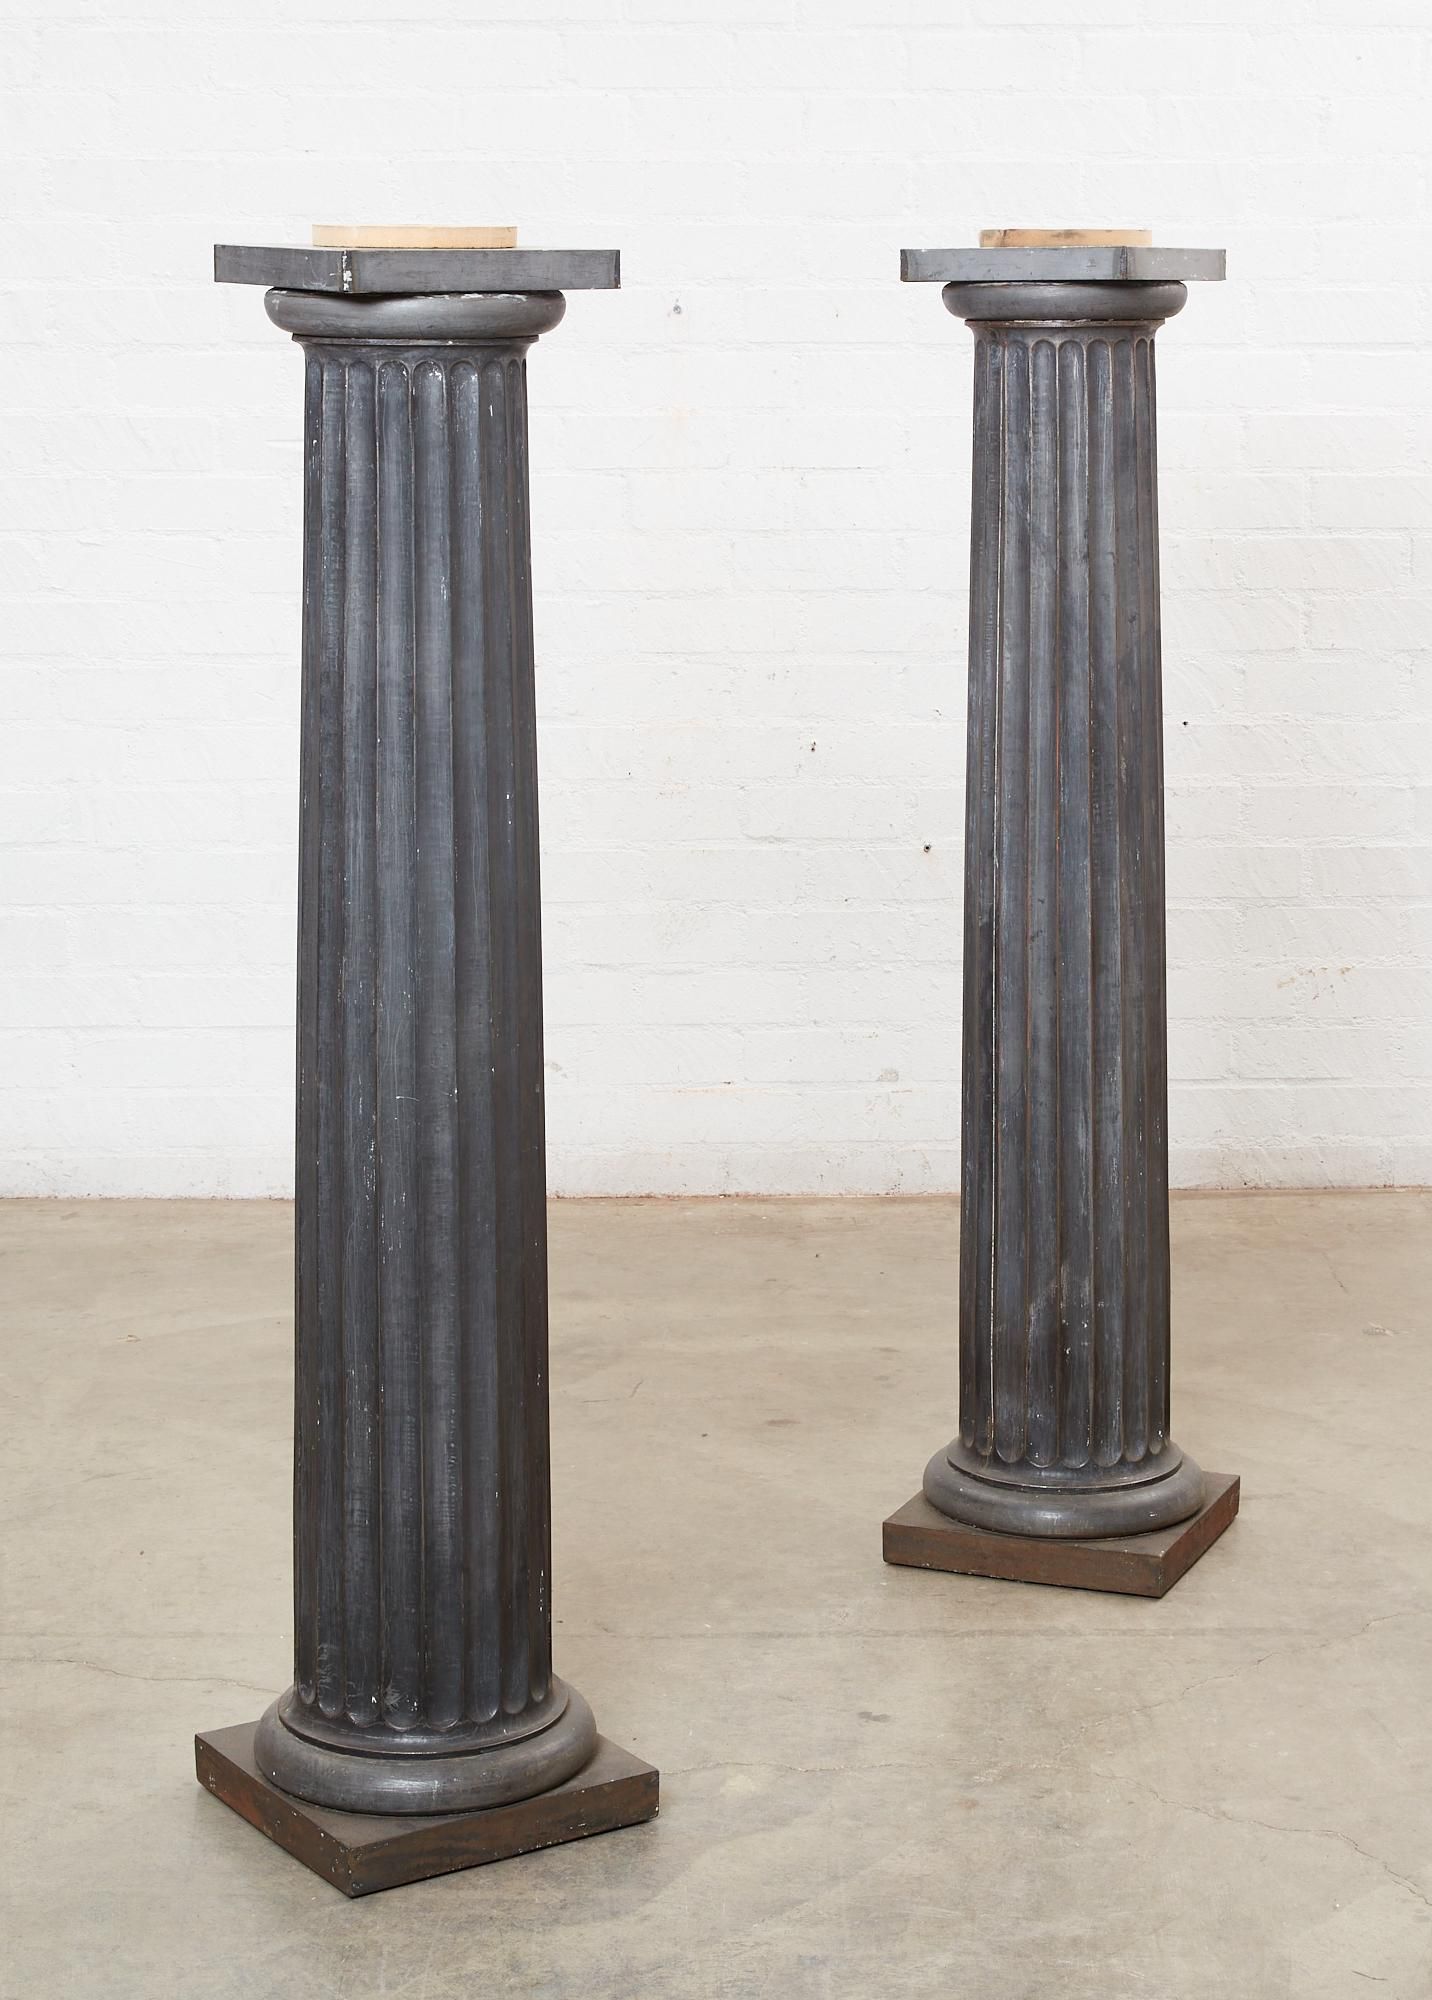 A PAIR OF NEOCLASSICAL STYLE METAL